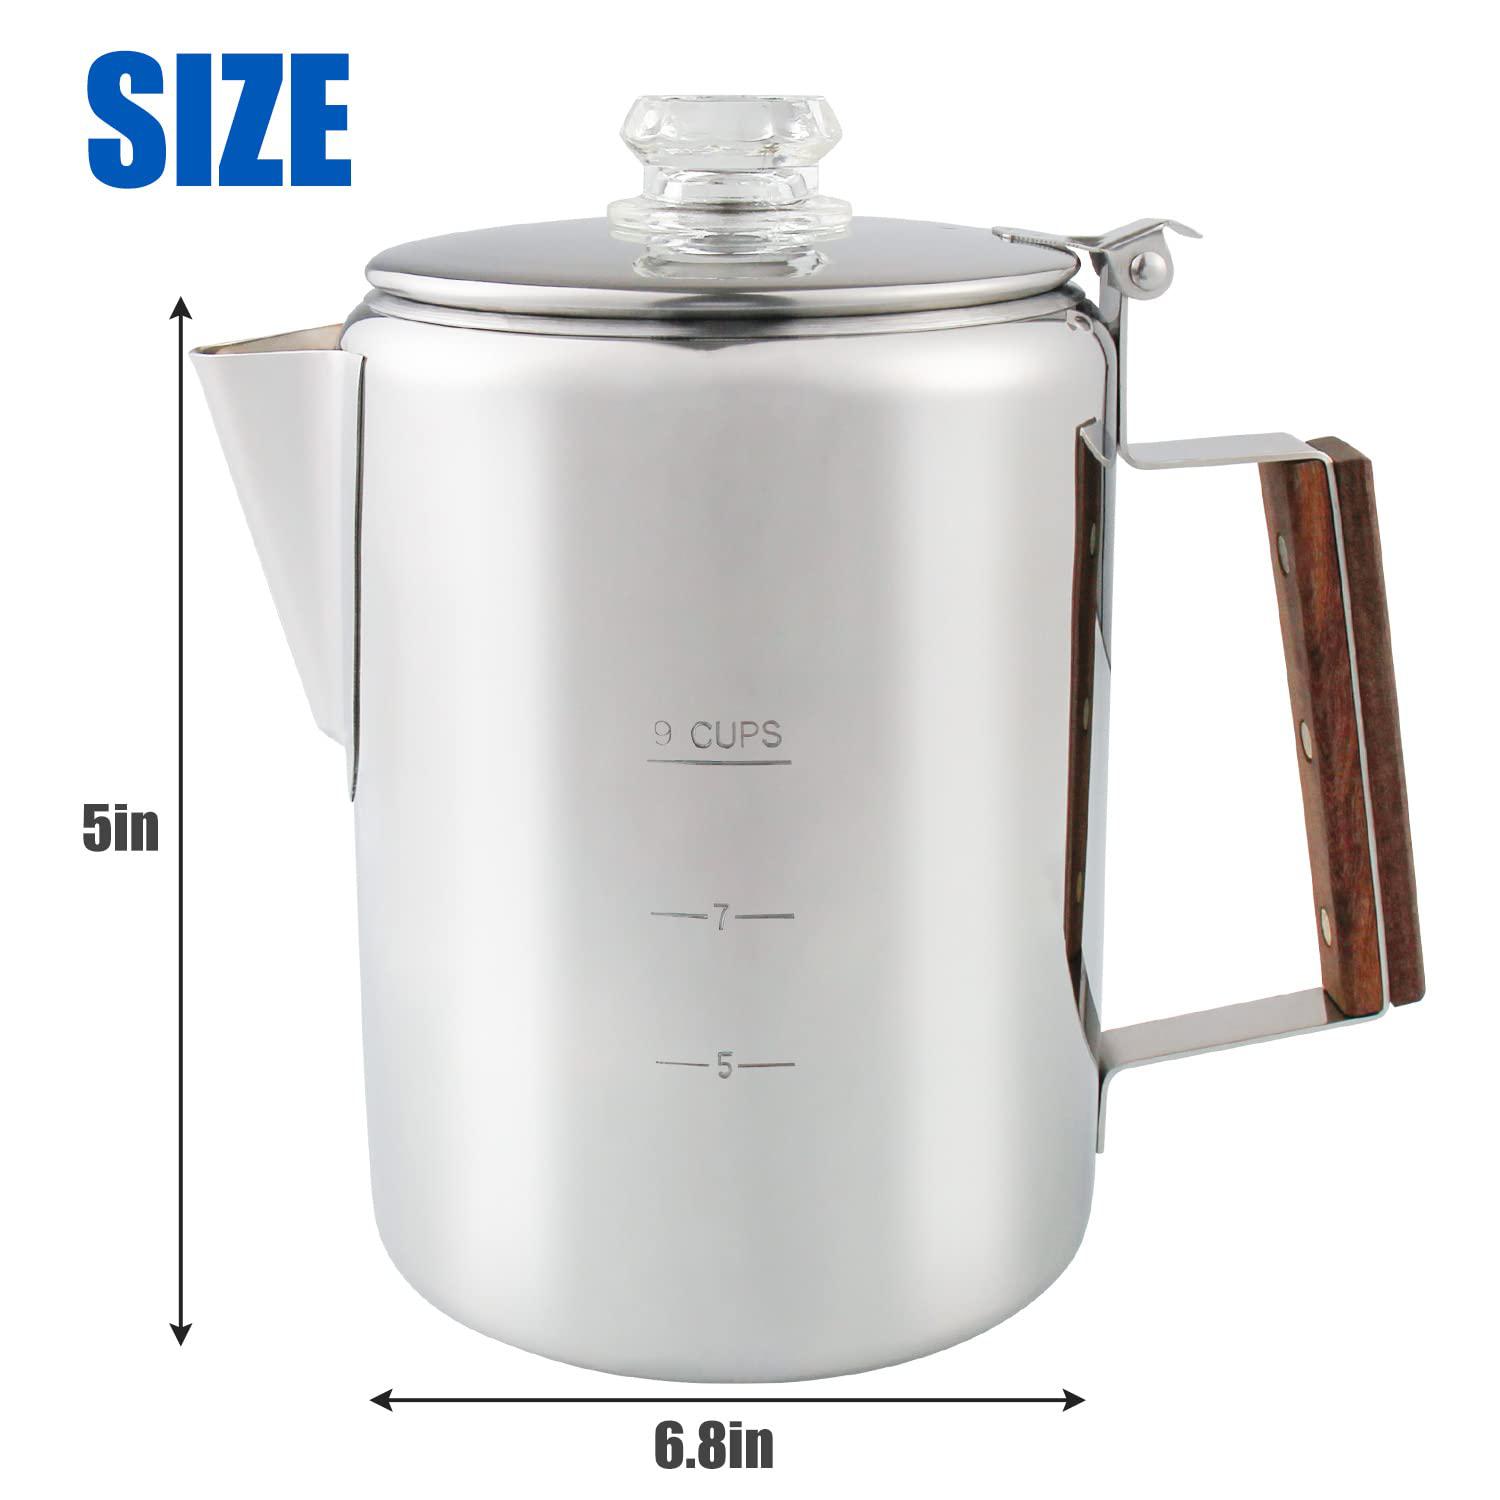 apoxcon coffee percolator, camping coffee pot 9 cups stainless steel coffee maker with clear top glass knob, percolator coffe